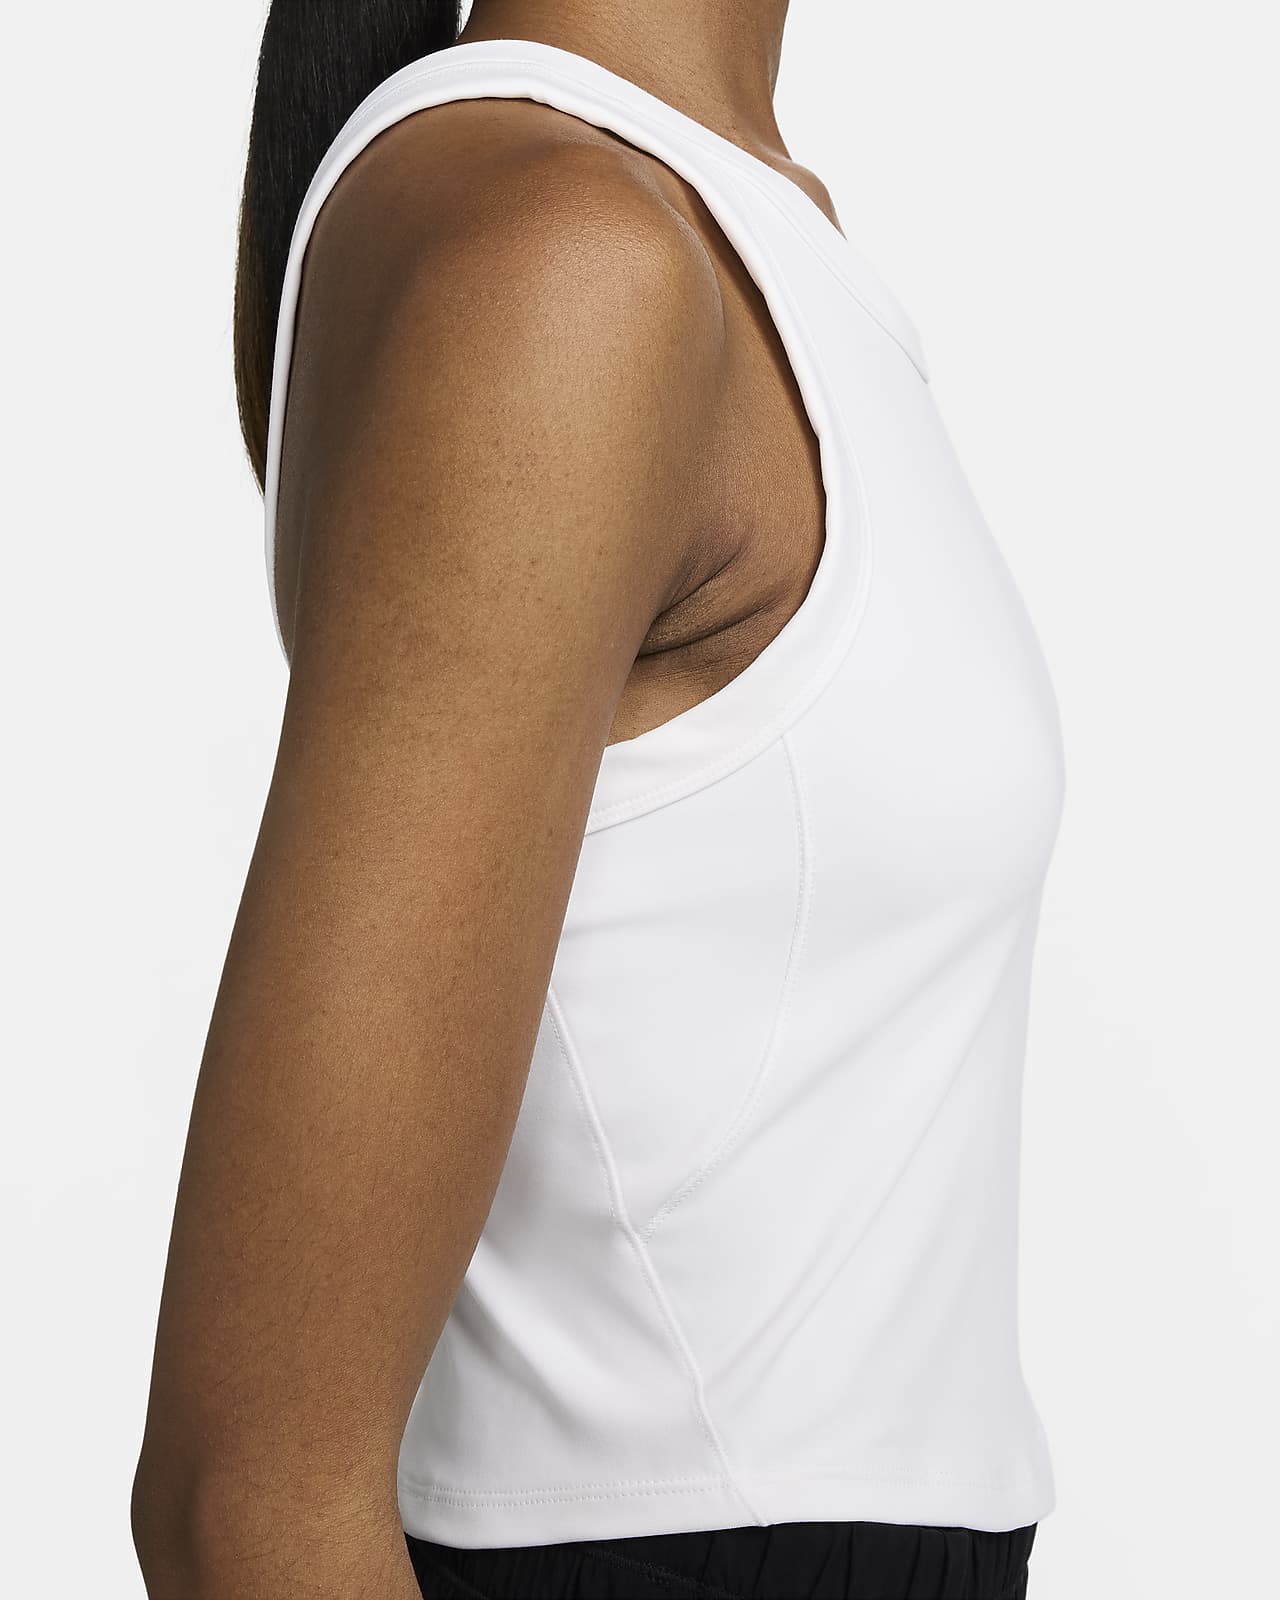 Nike One Fitted Women's Dri-FIT Strappy Cropped Tank Top.